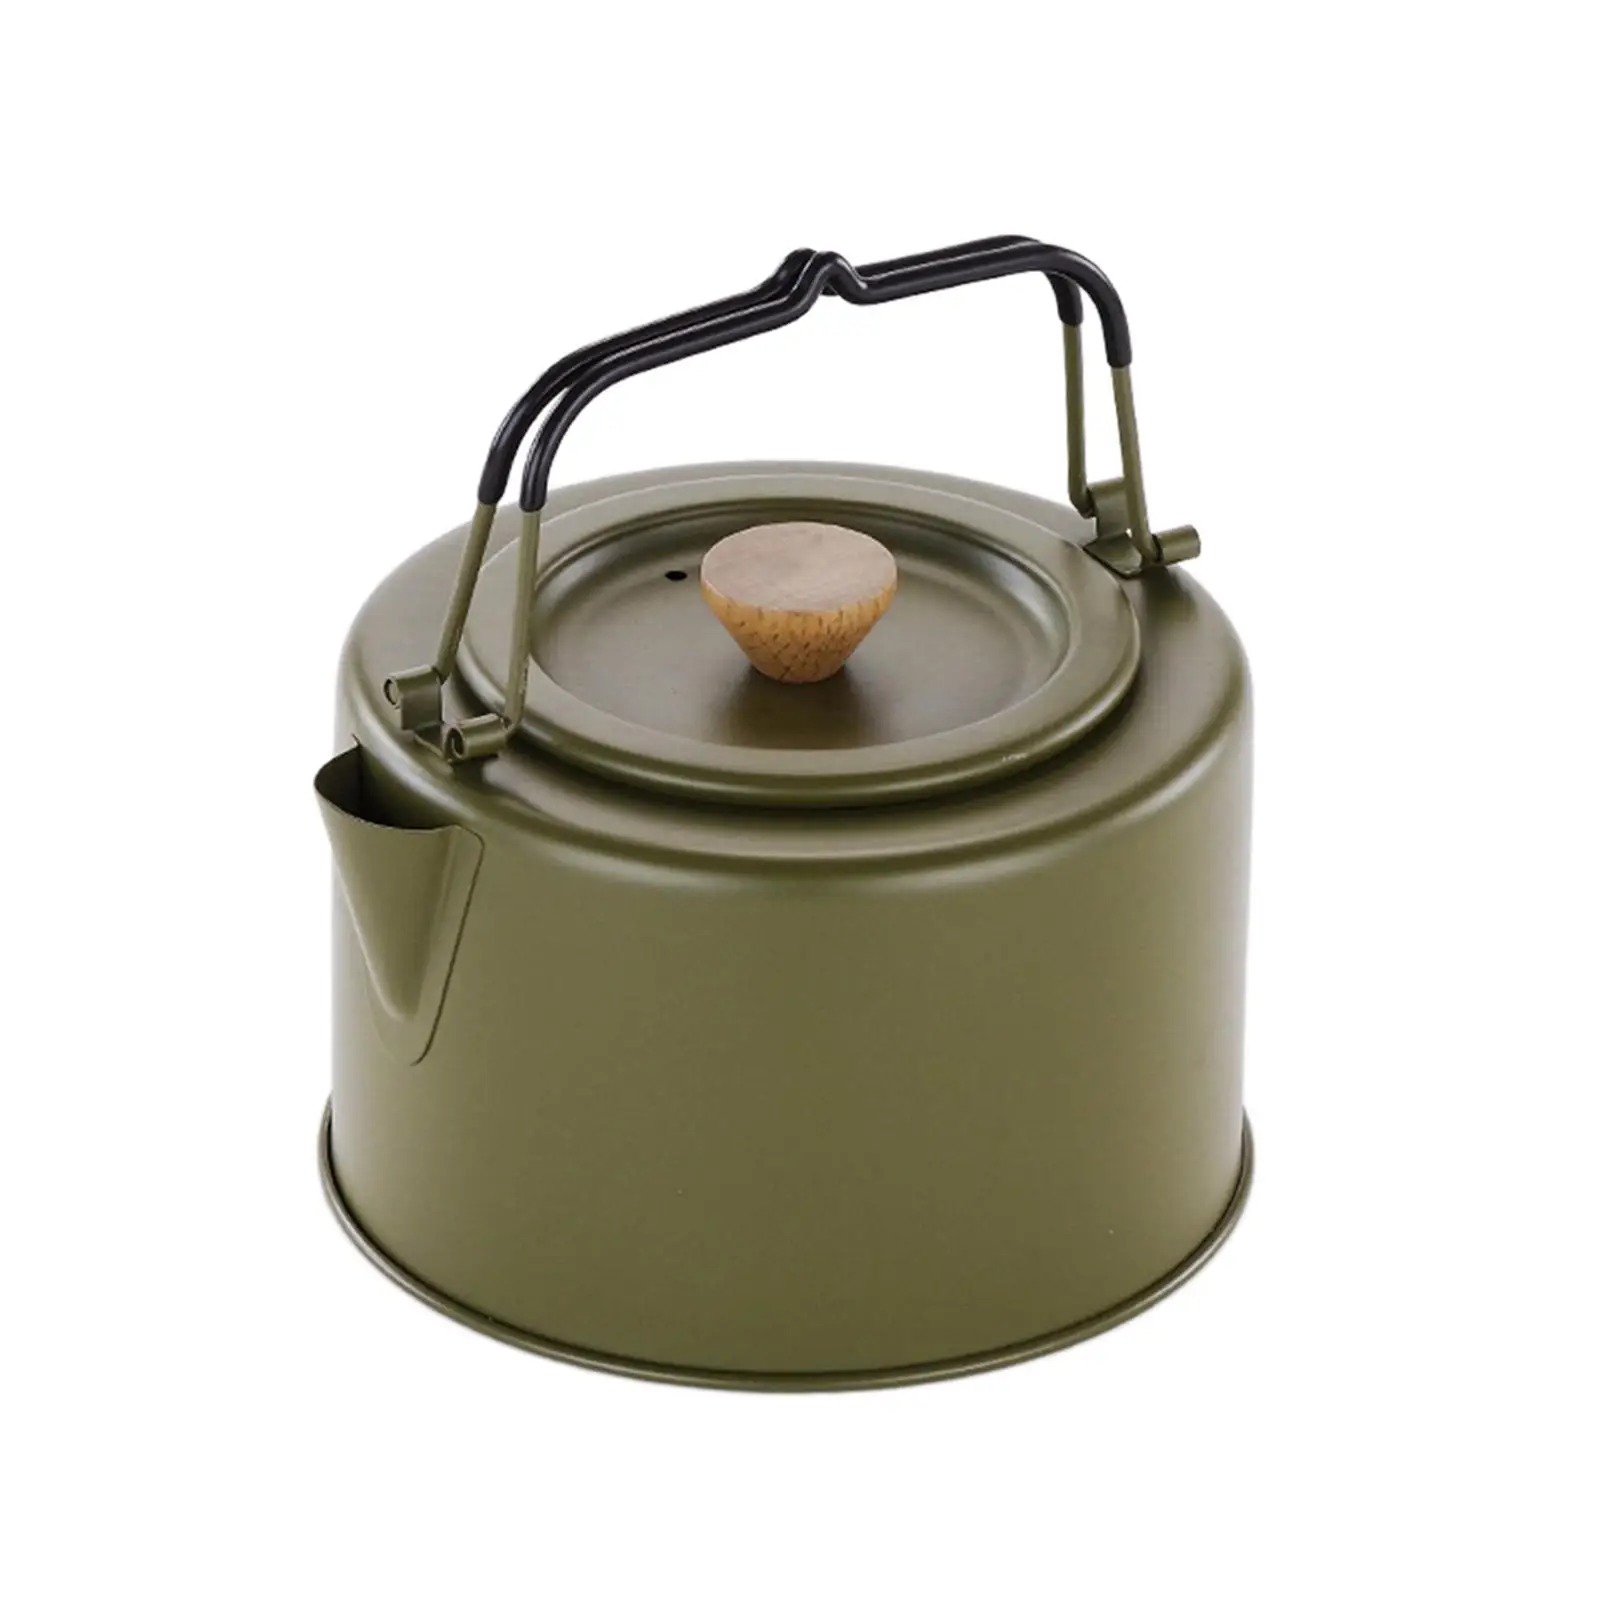 Water Boiler Teapot Camping Water Kettle for Camp Backpacking Mountaineering